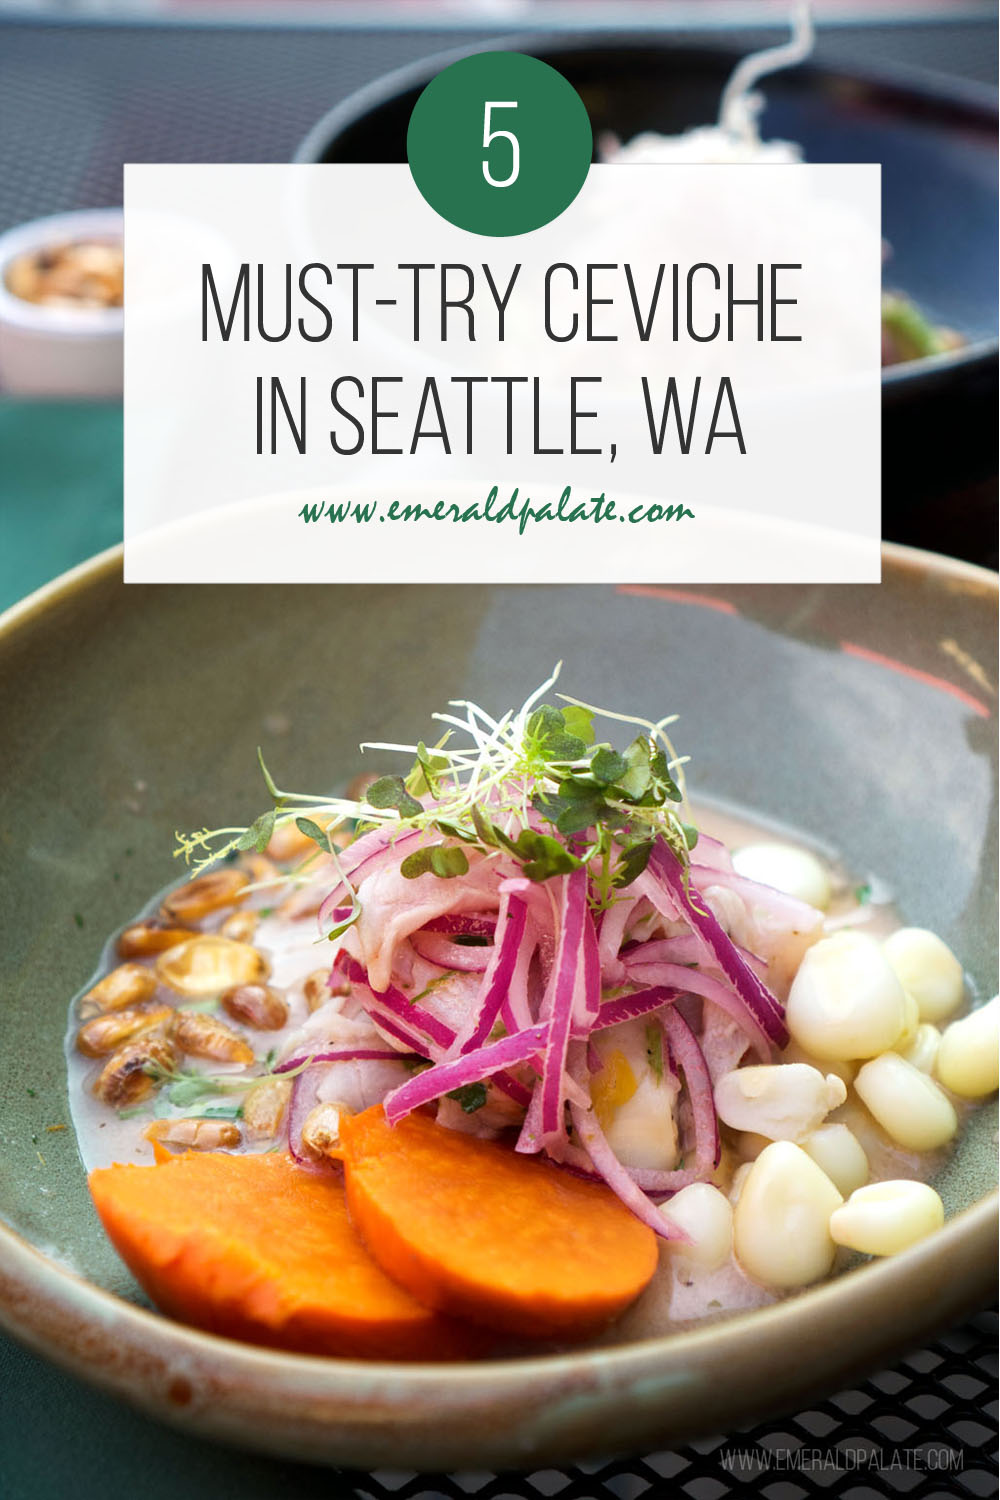 must-try ceviche in Seattle, Washington. If you are looking for authentic Peruvian ceviche of Mexican ceviche, here is where to find the best Seattle ceviche.